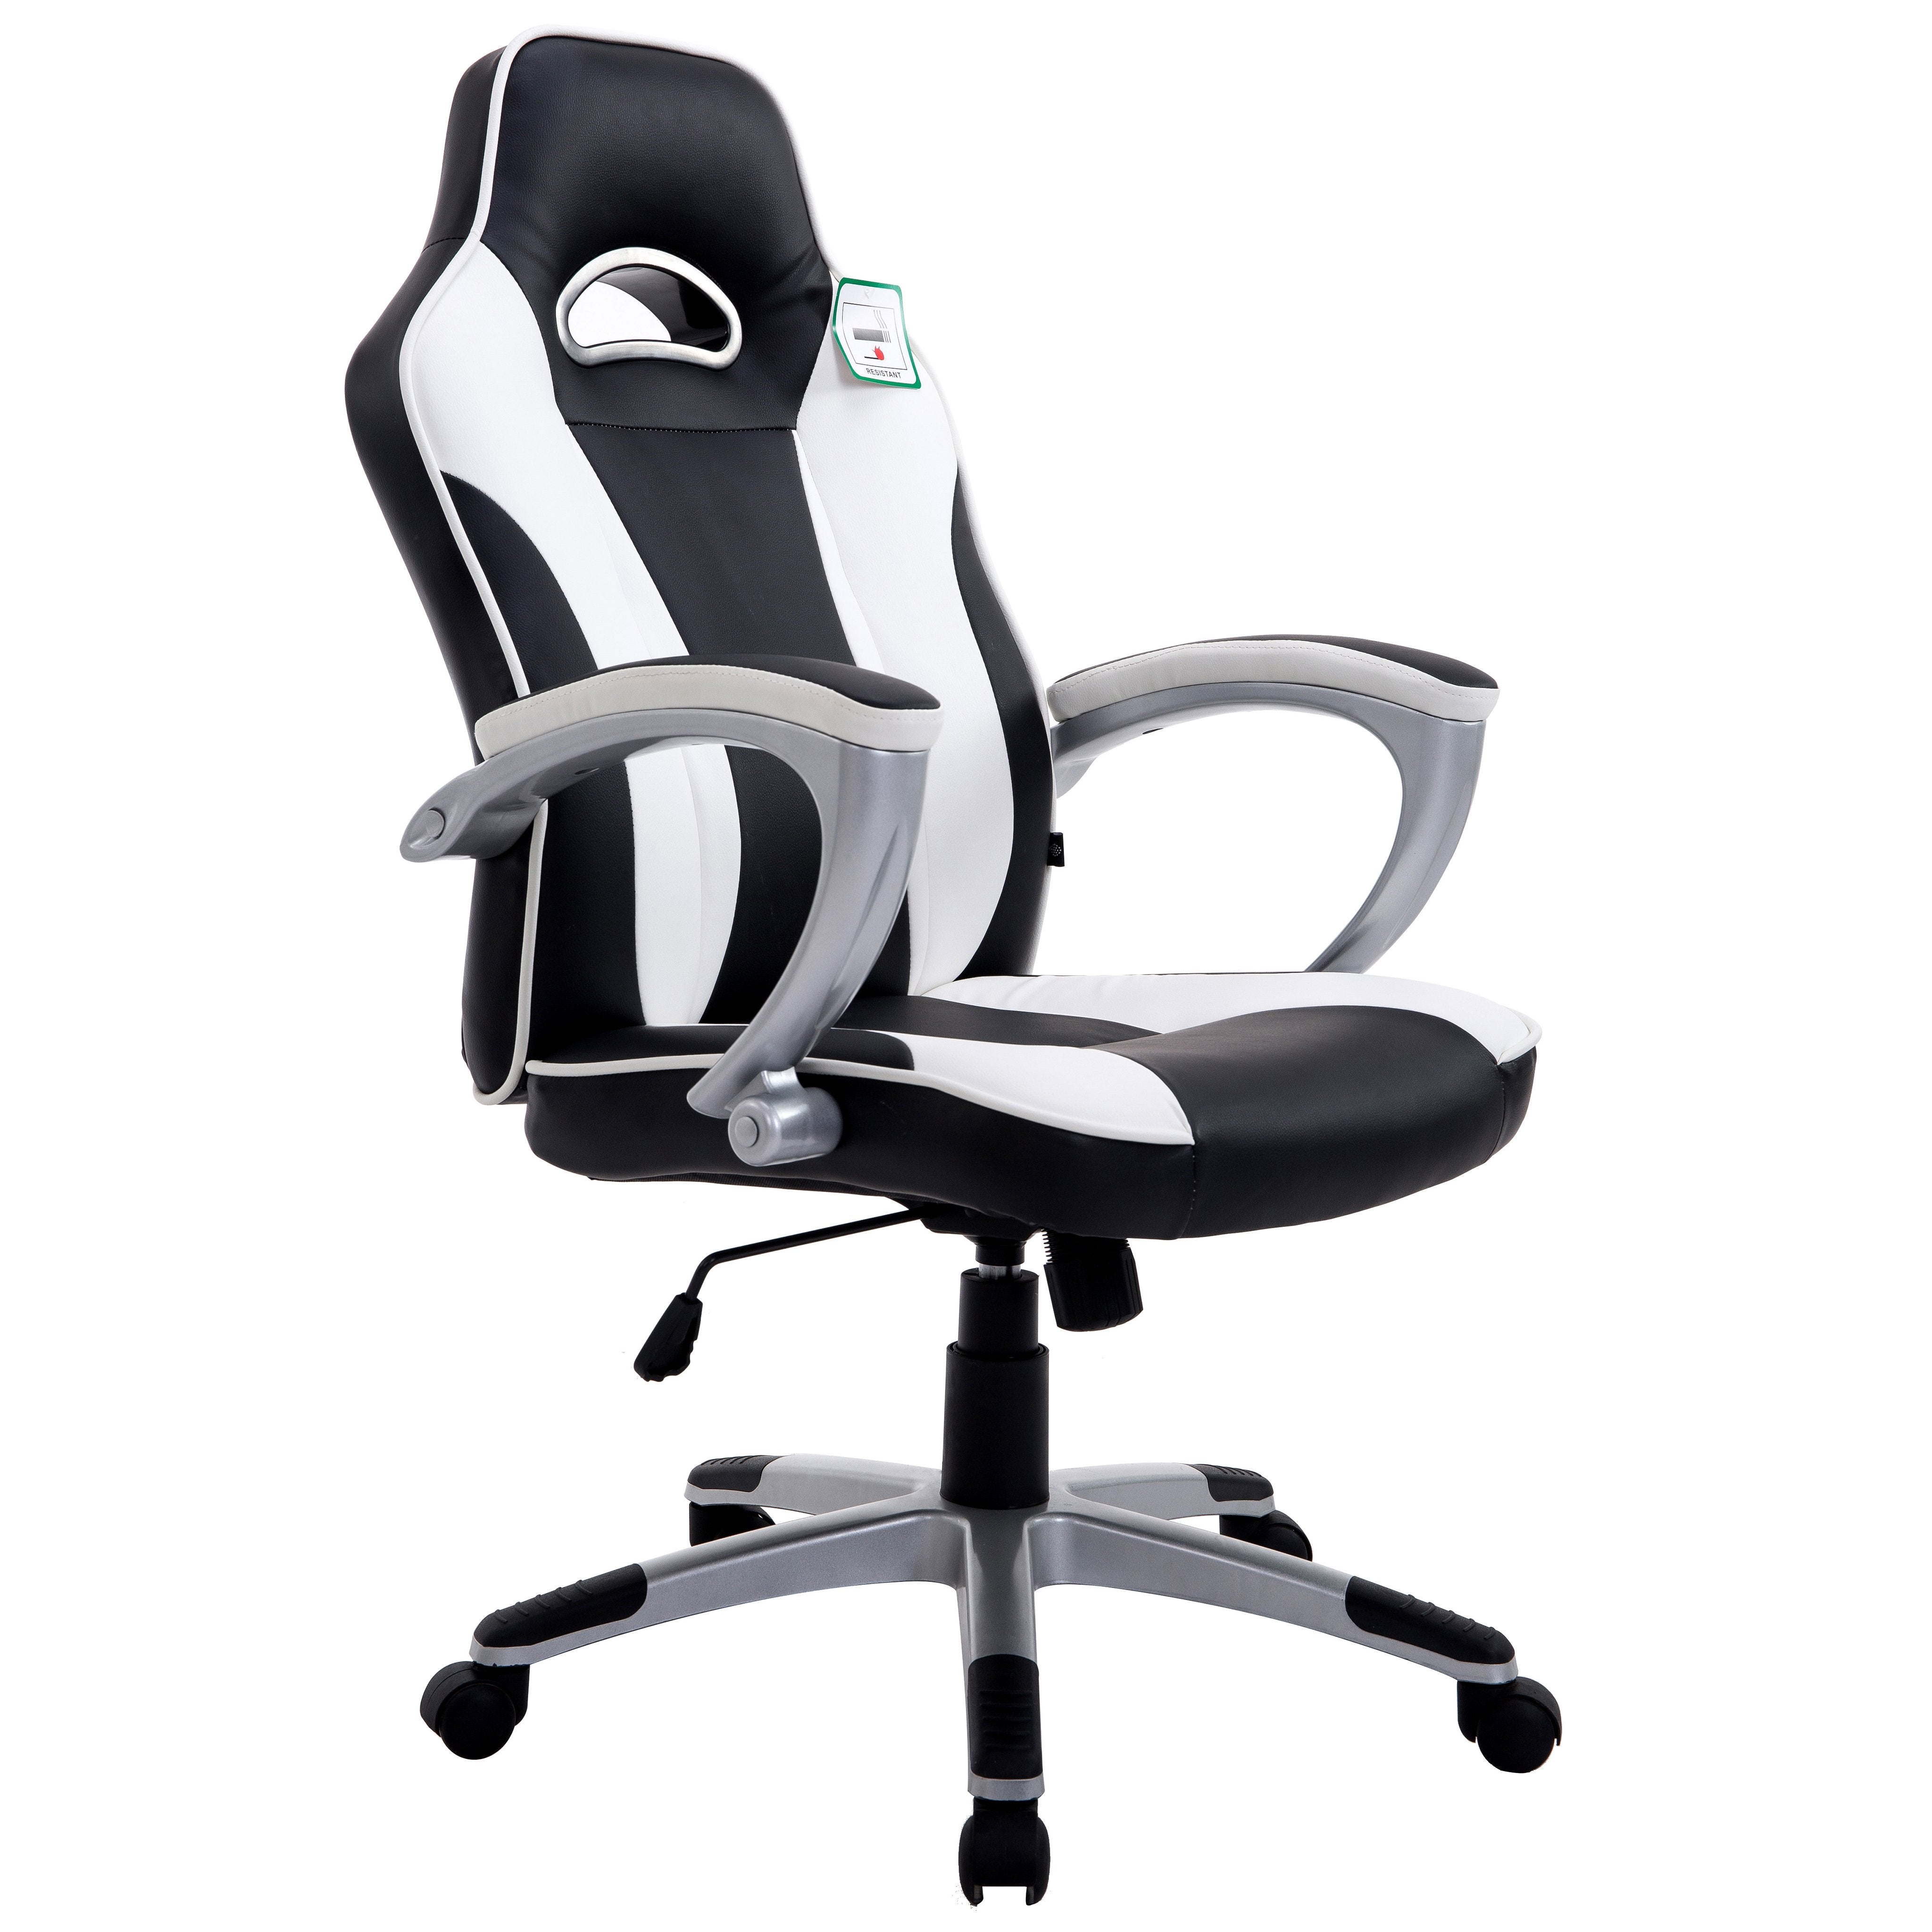 High Back Racing Sport Gaming PU Leather Swivel Chair in Contrasting Colours, White & Black